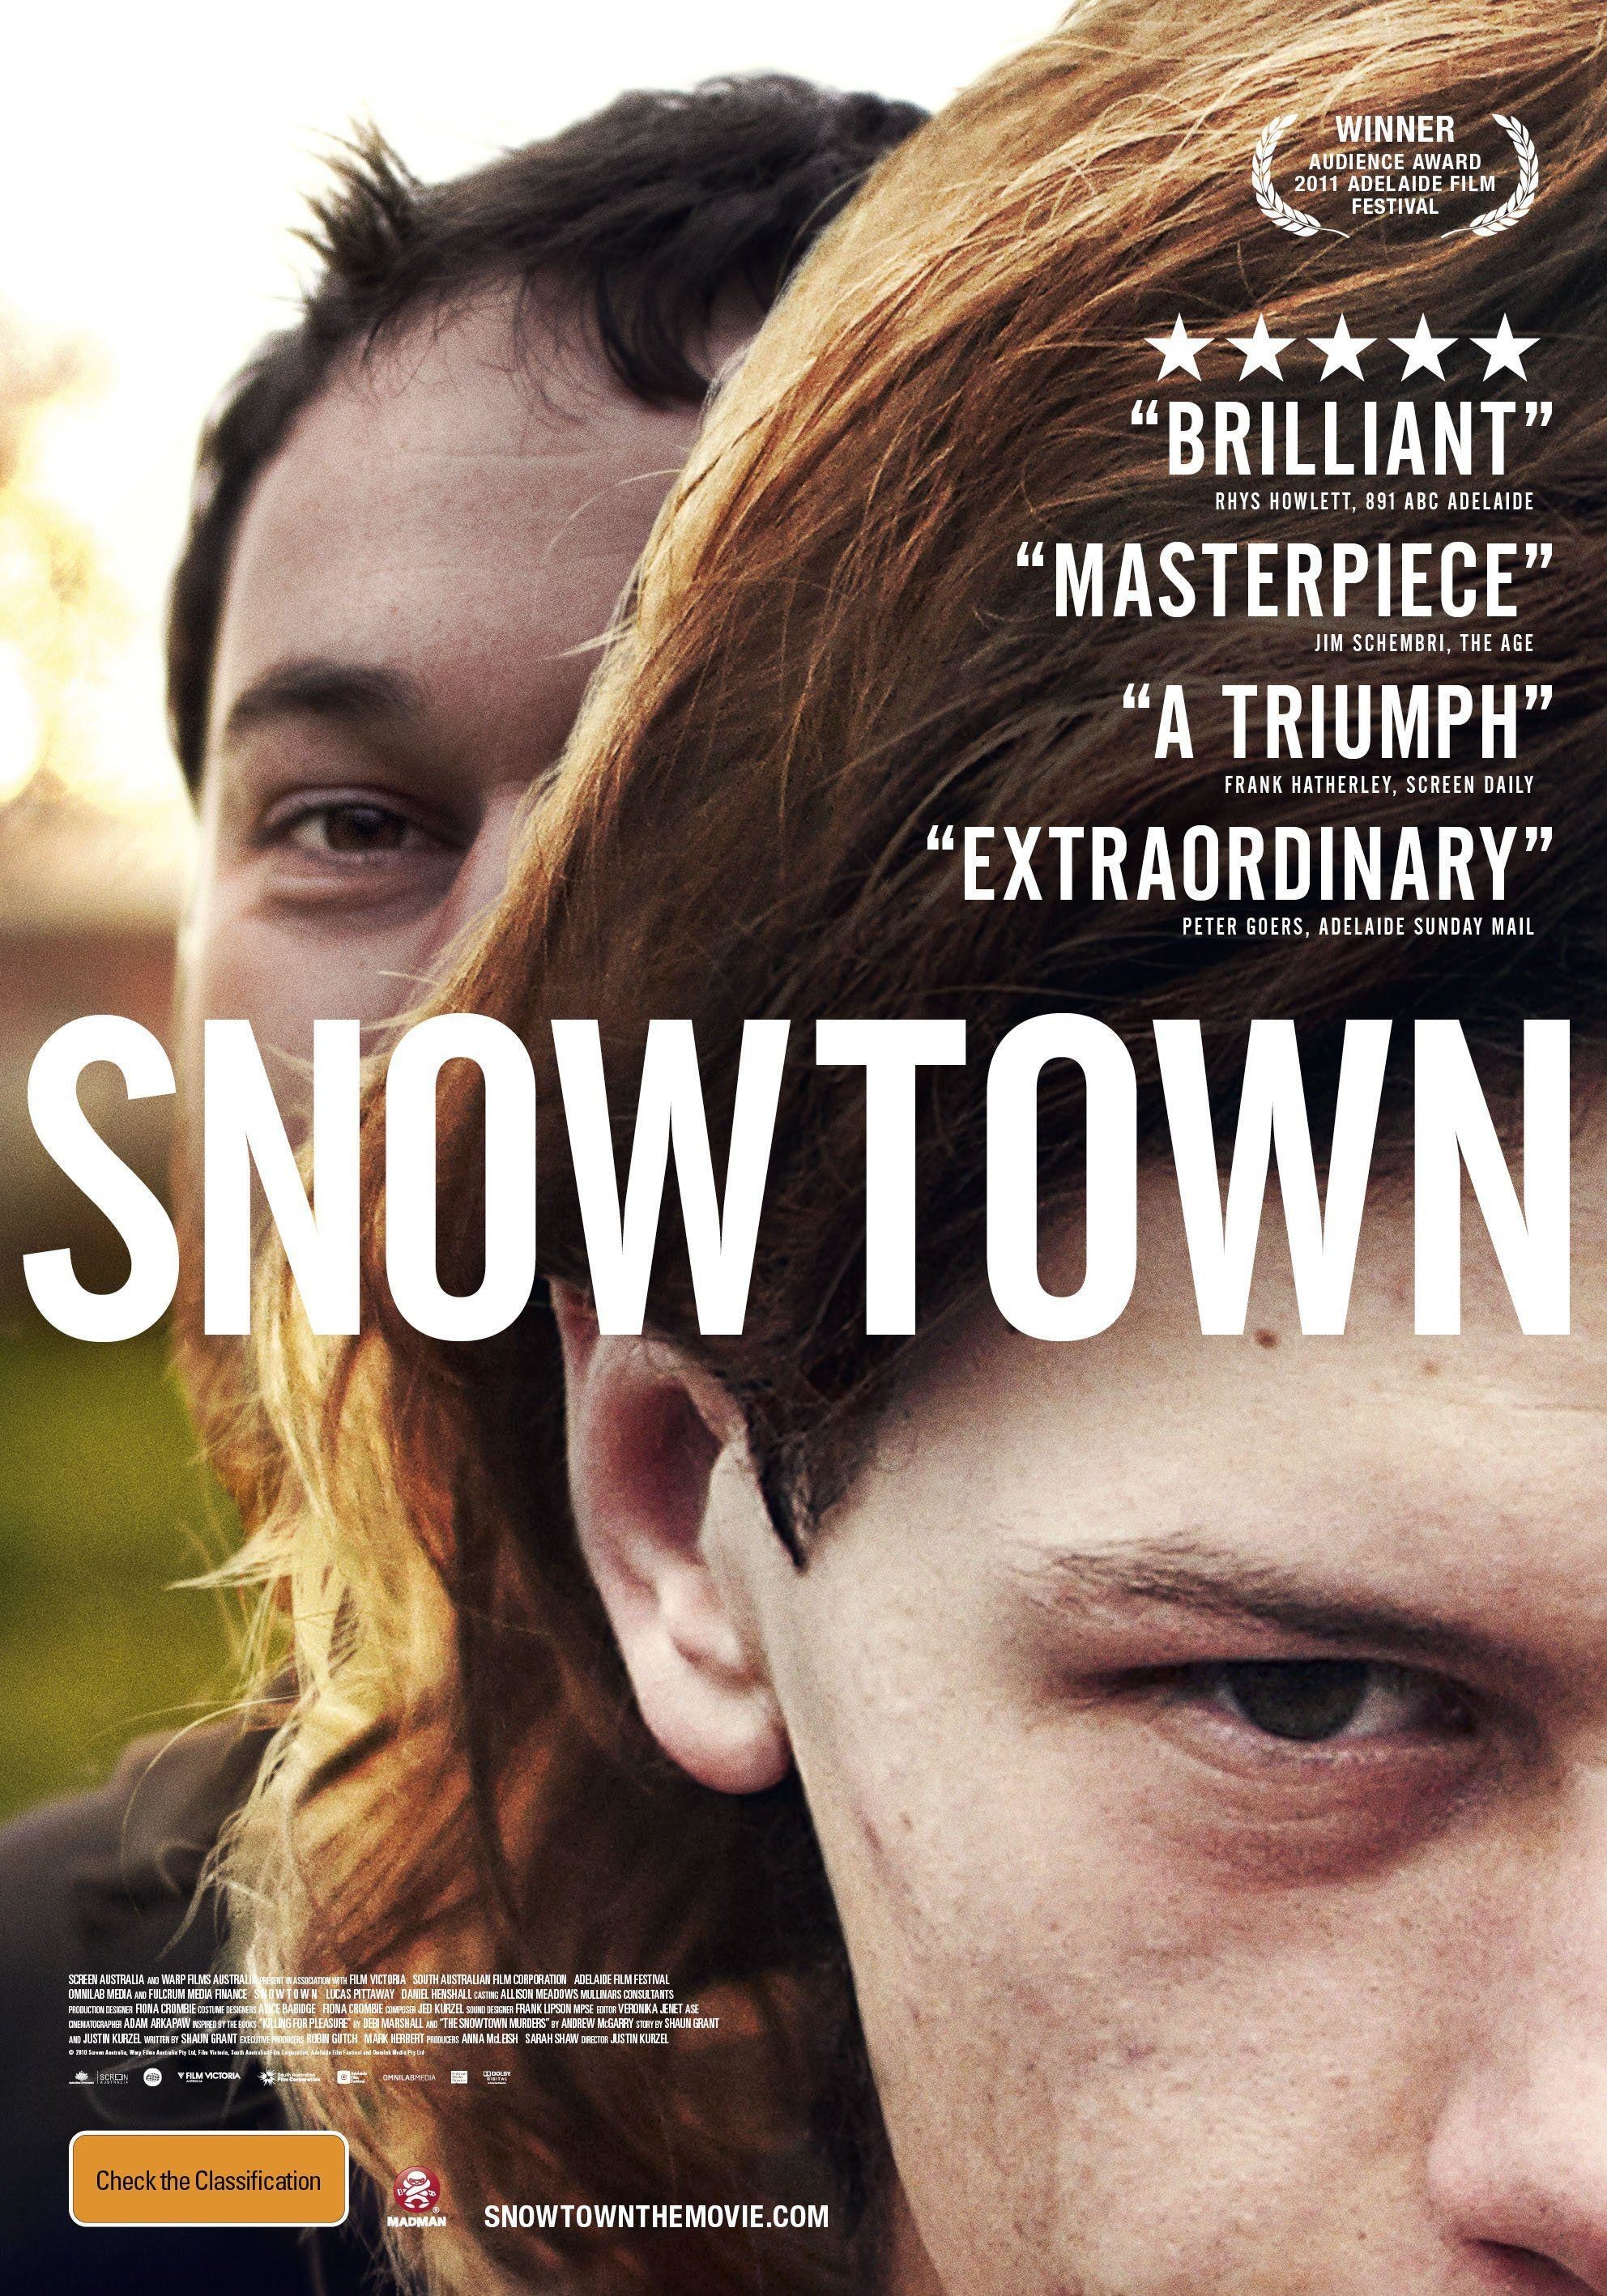 Poster image for the movie &quot;Snowtown&quot; depicting two boys staring at the camera; the one in the background is smiling, while the one in the foreground looks menacing